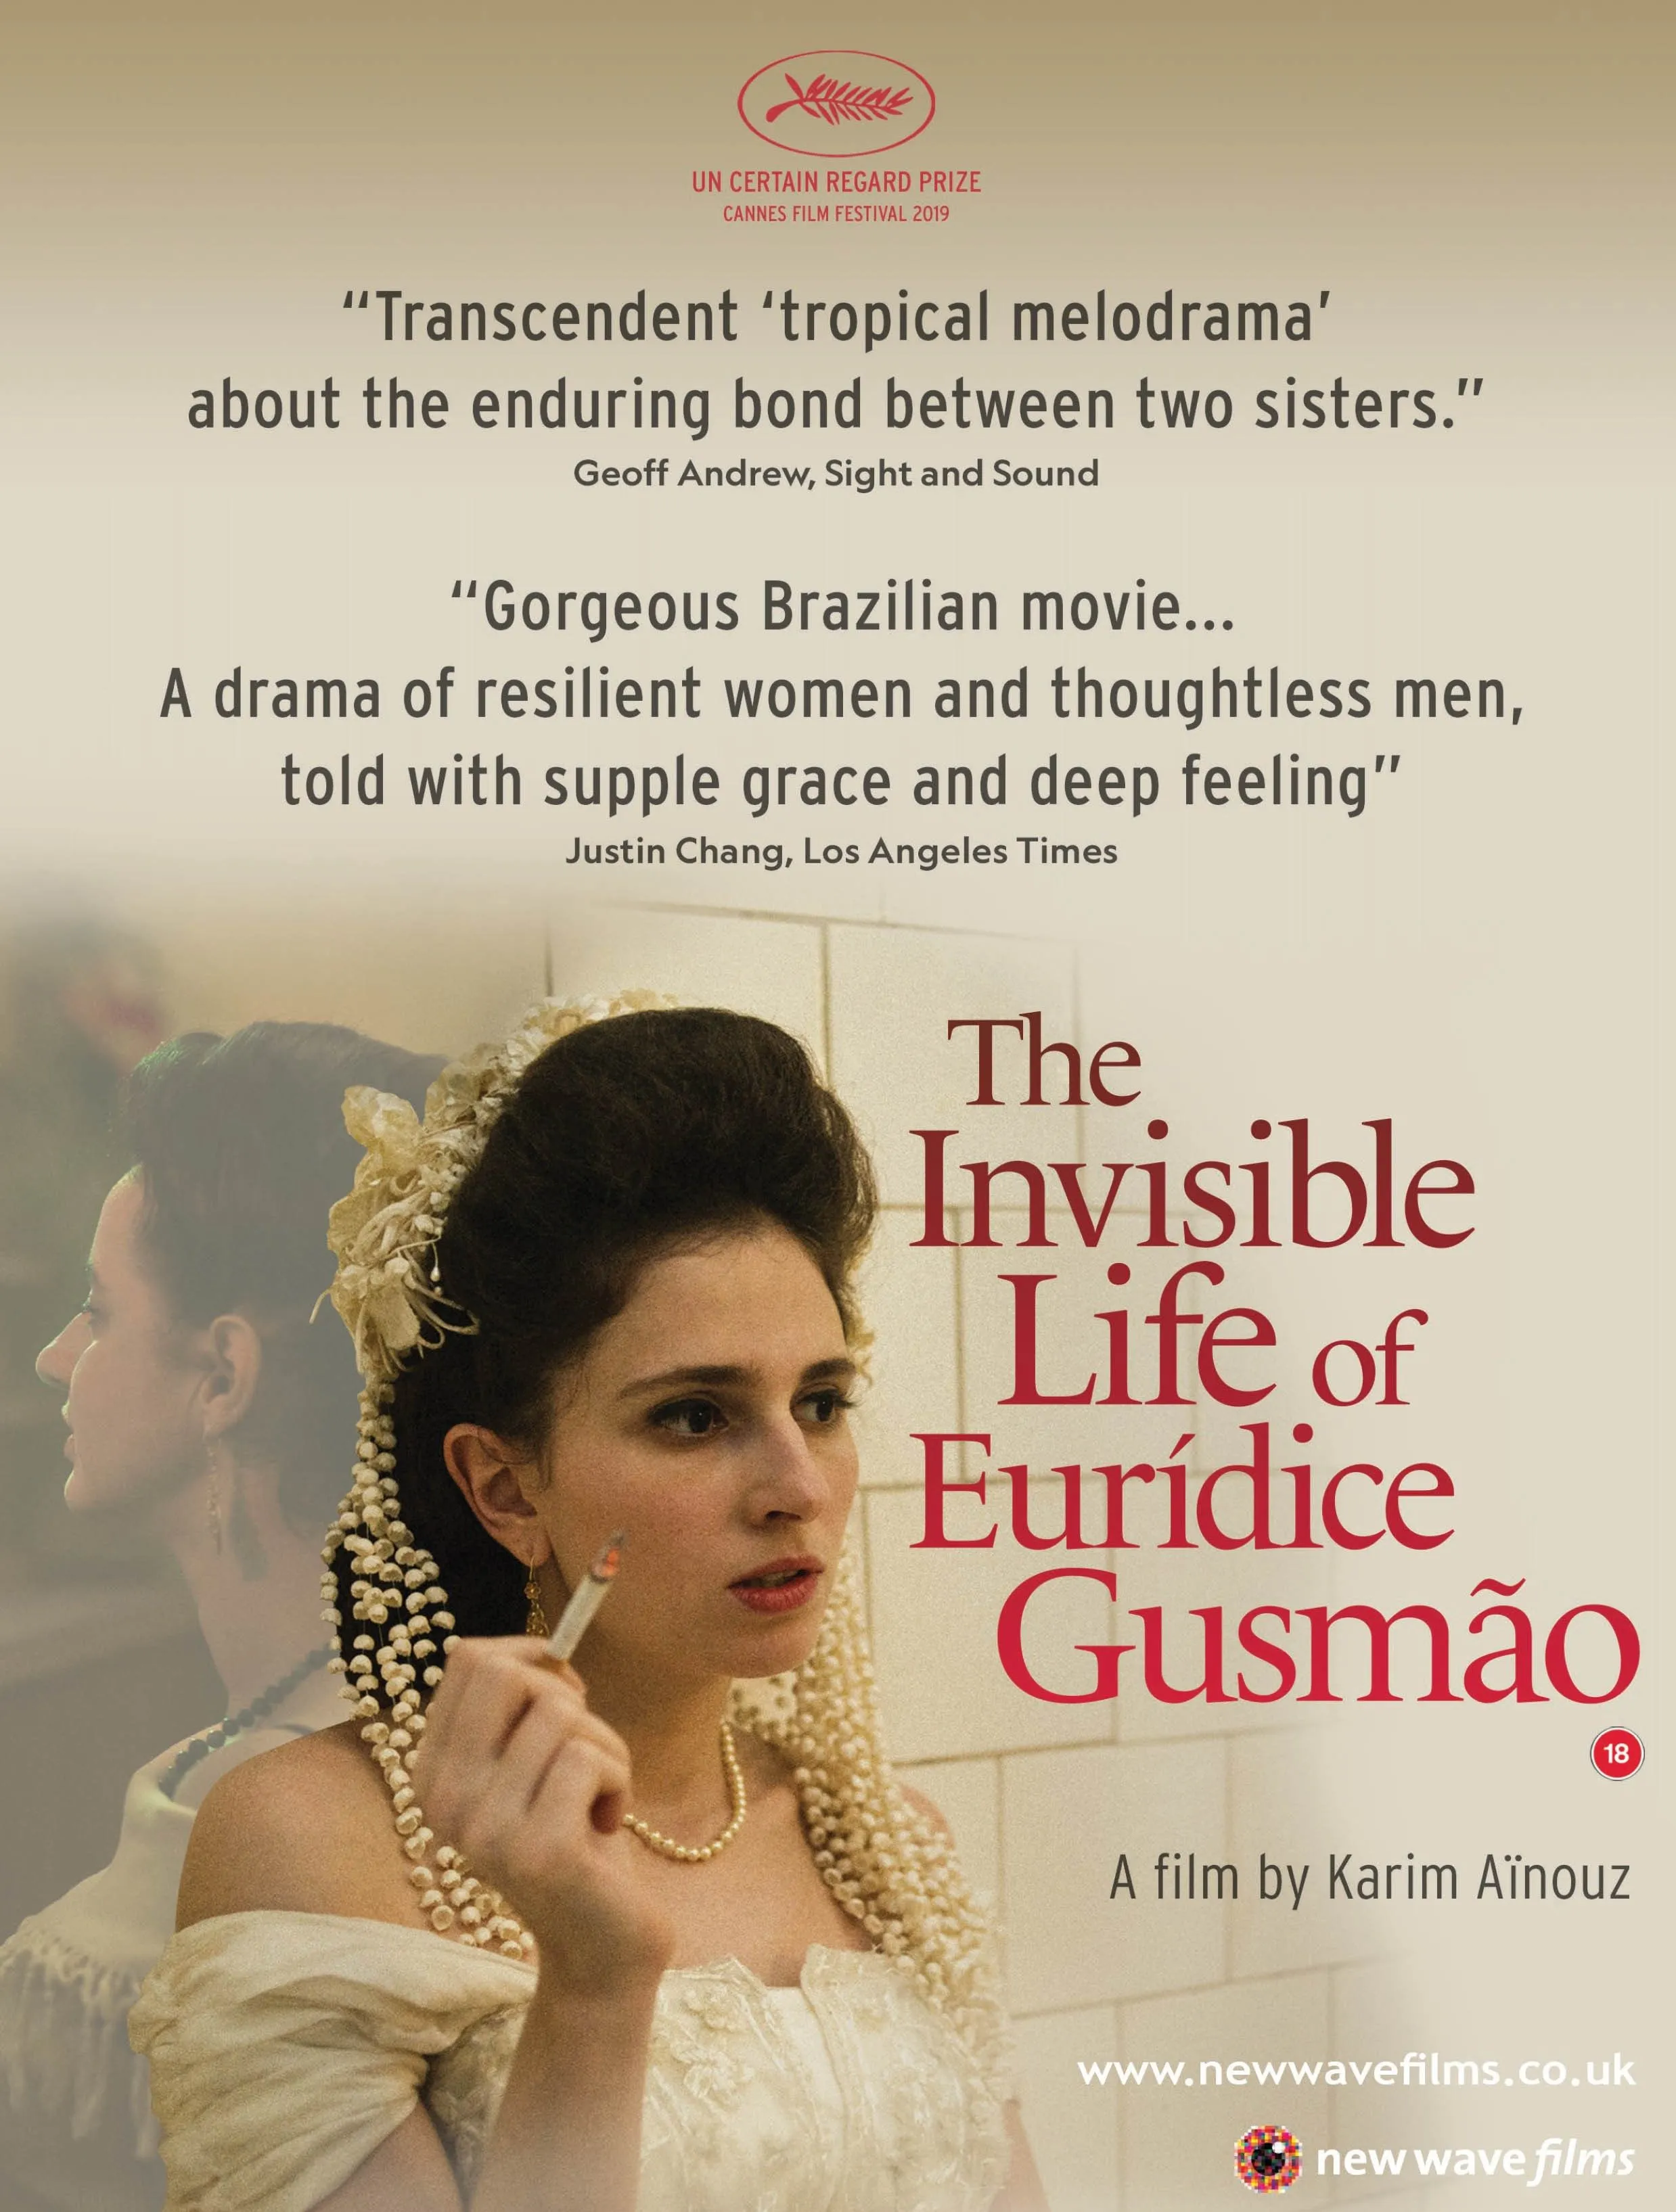 GFS: The Invisible Life Of Euridice Gusmao